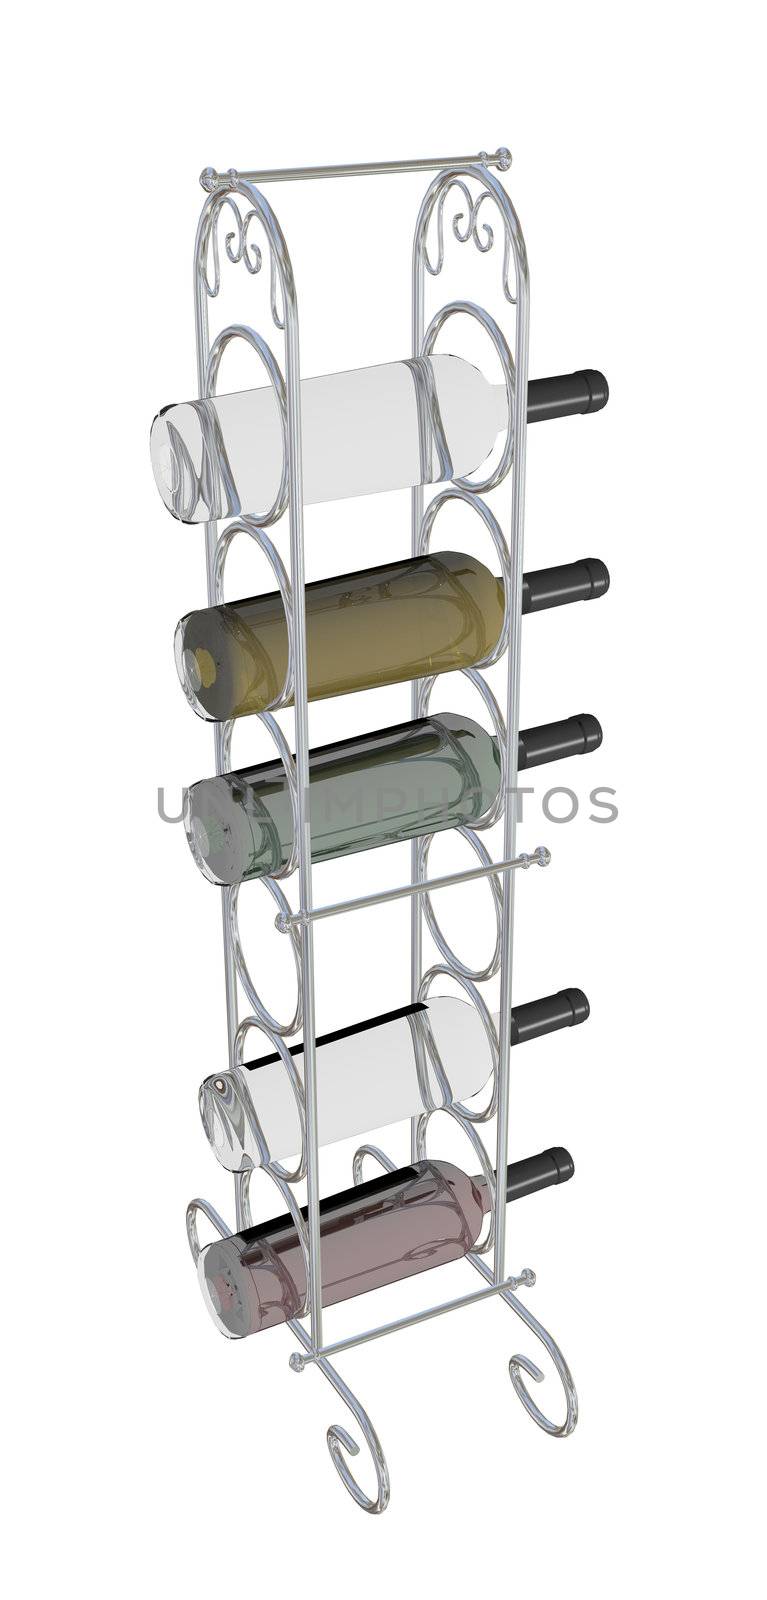 Wine bottles placed on a metal wine rack, 3D illustration, isolated against a white background